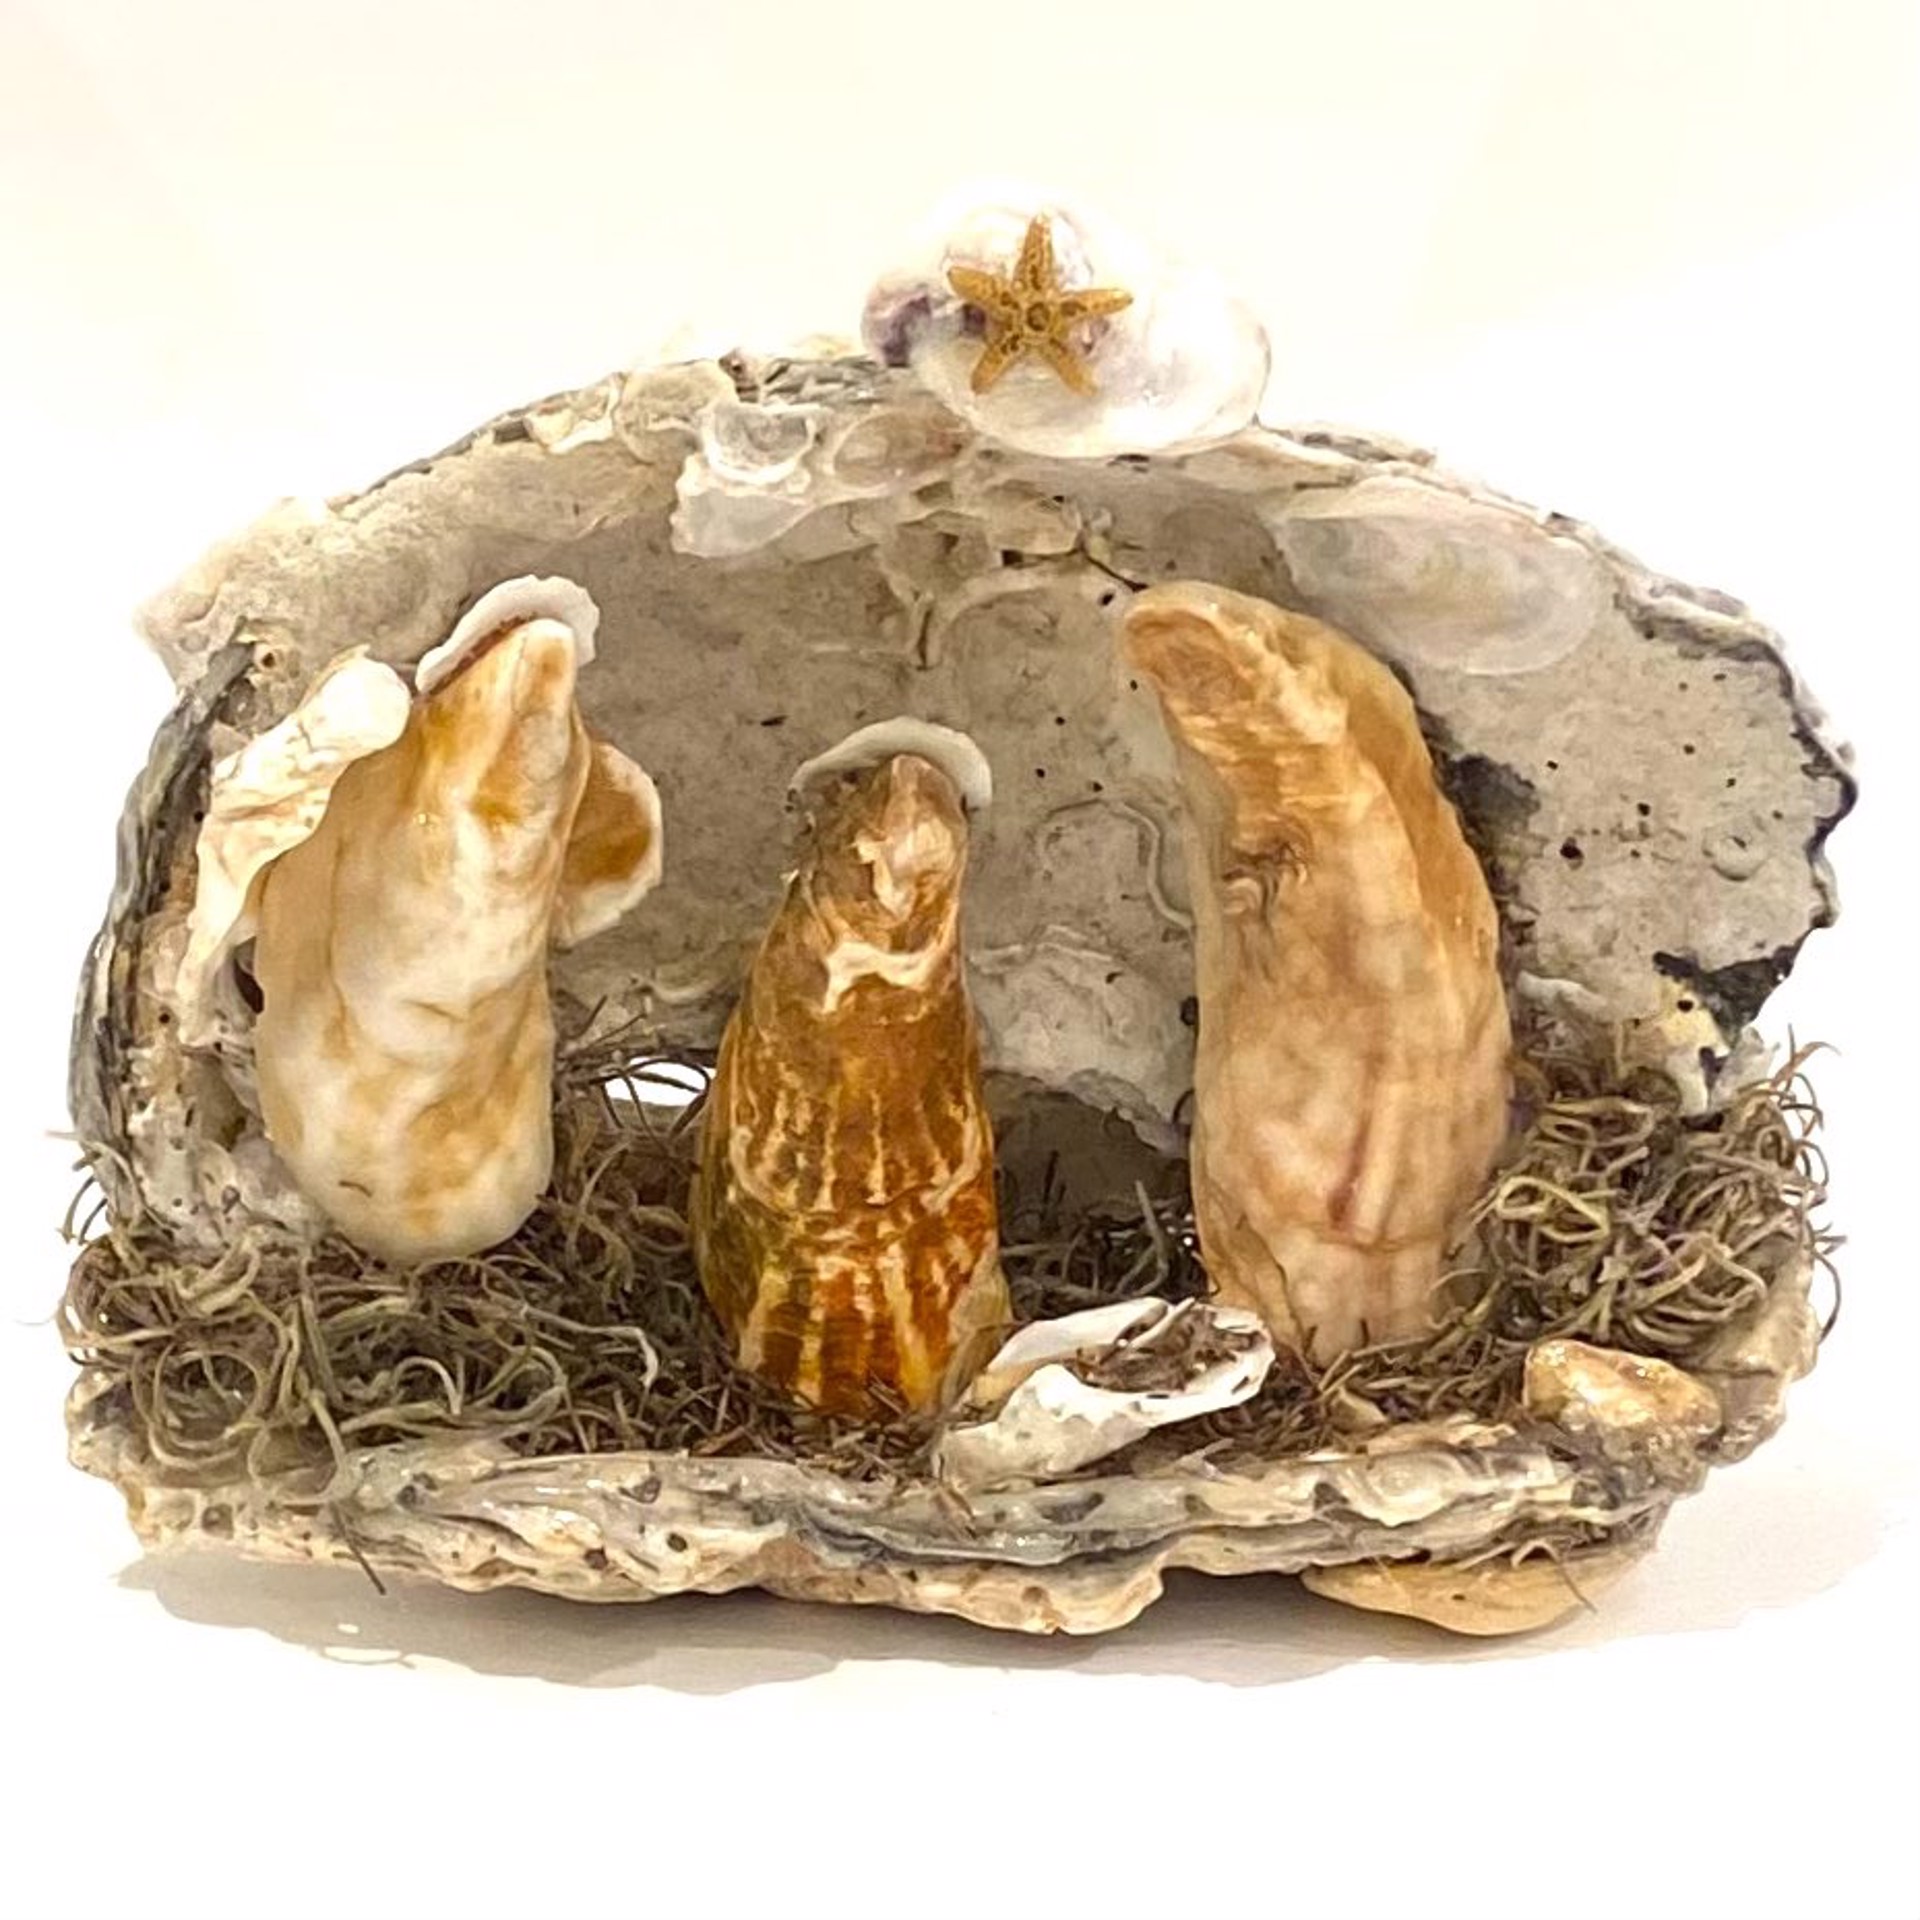 CN22-21 Creche From The Sea~Oyster Shell by Chris Nietert